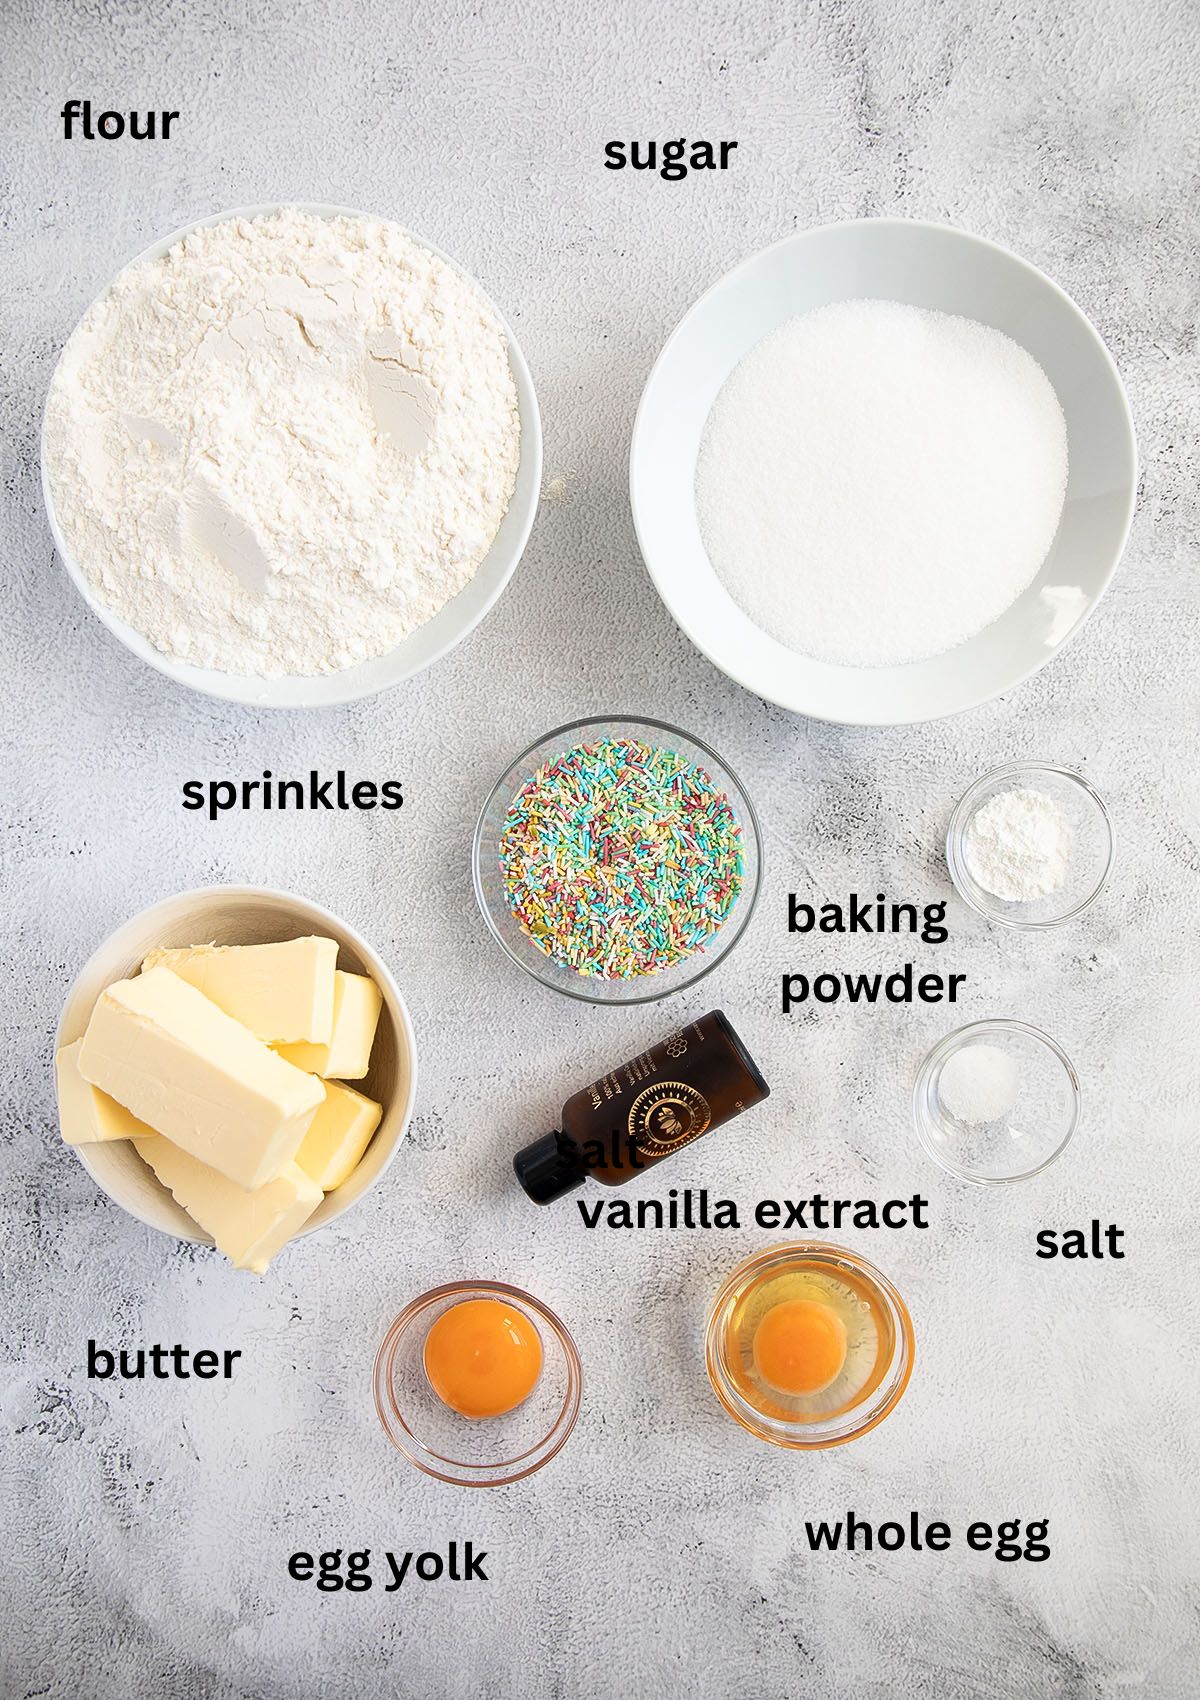 labeled ingredients for cookies made with sprinkles.